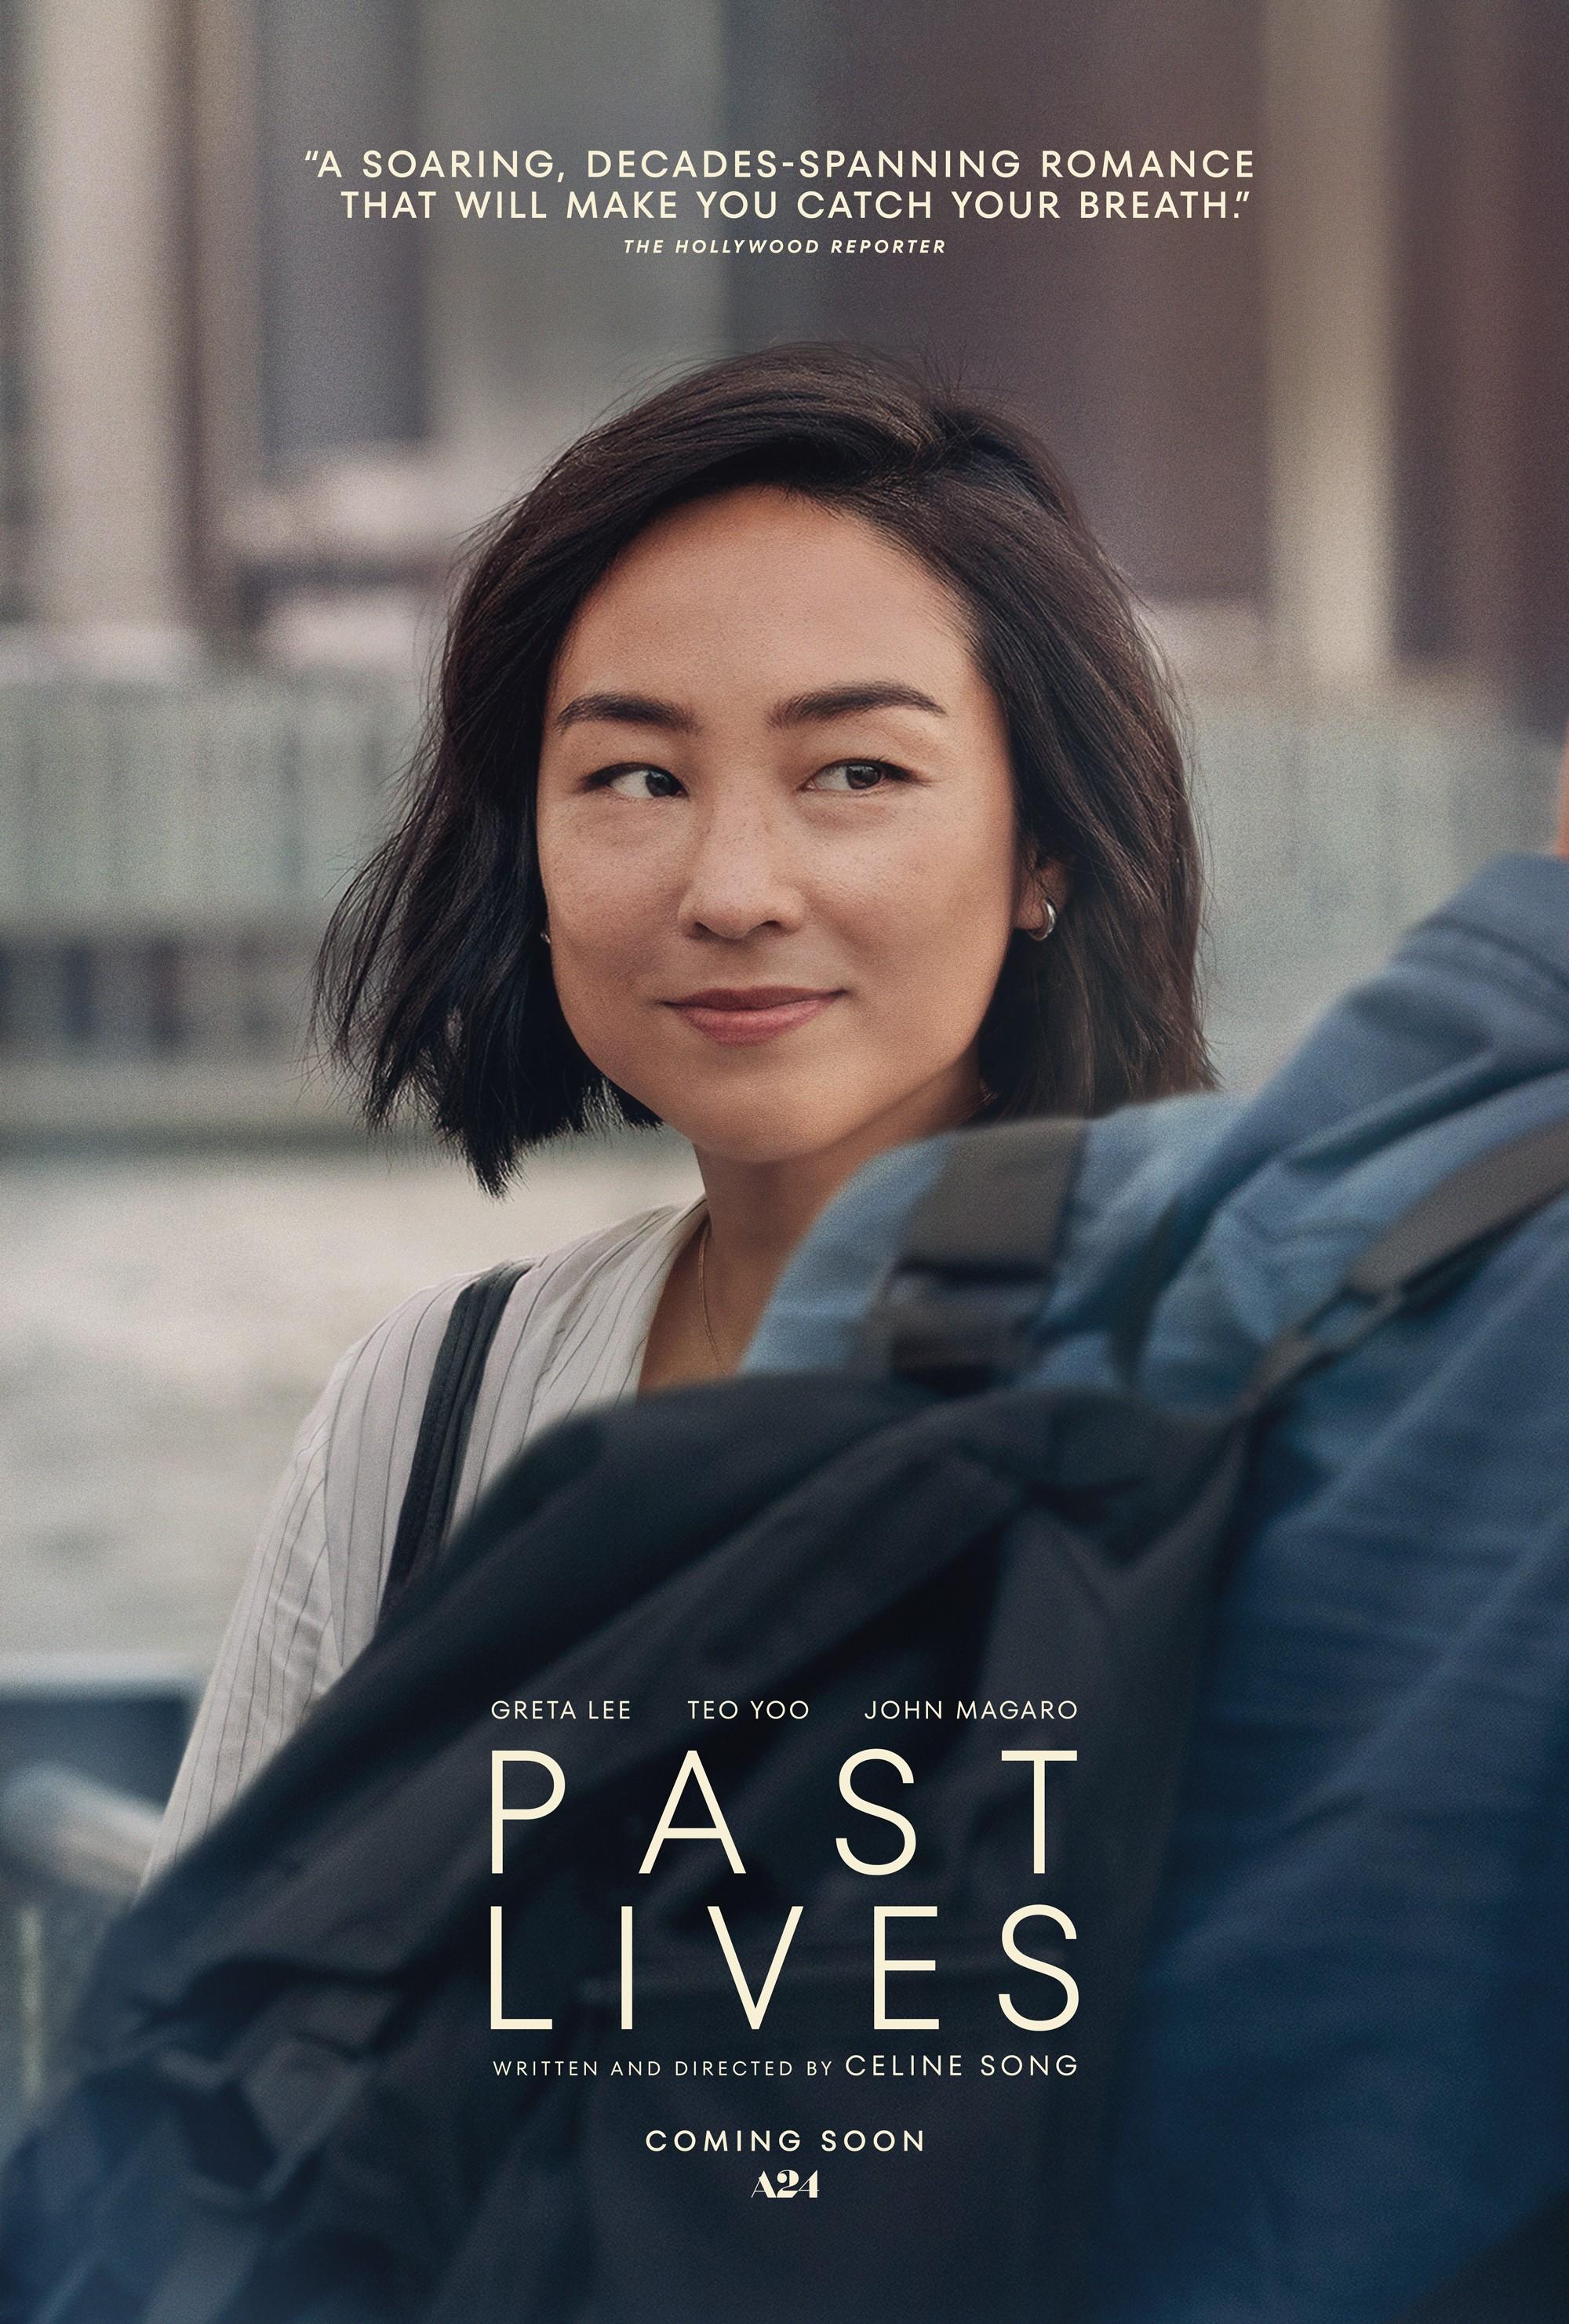 Decades later, their paths converge, leading to a week filled with fate, love, and life-altering choices. This semi-autobiographical story draws inspiration from director Celine Song's personal experiences.